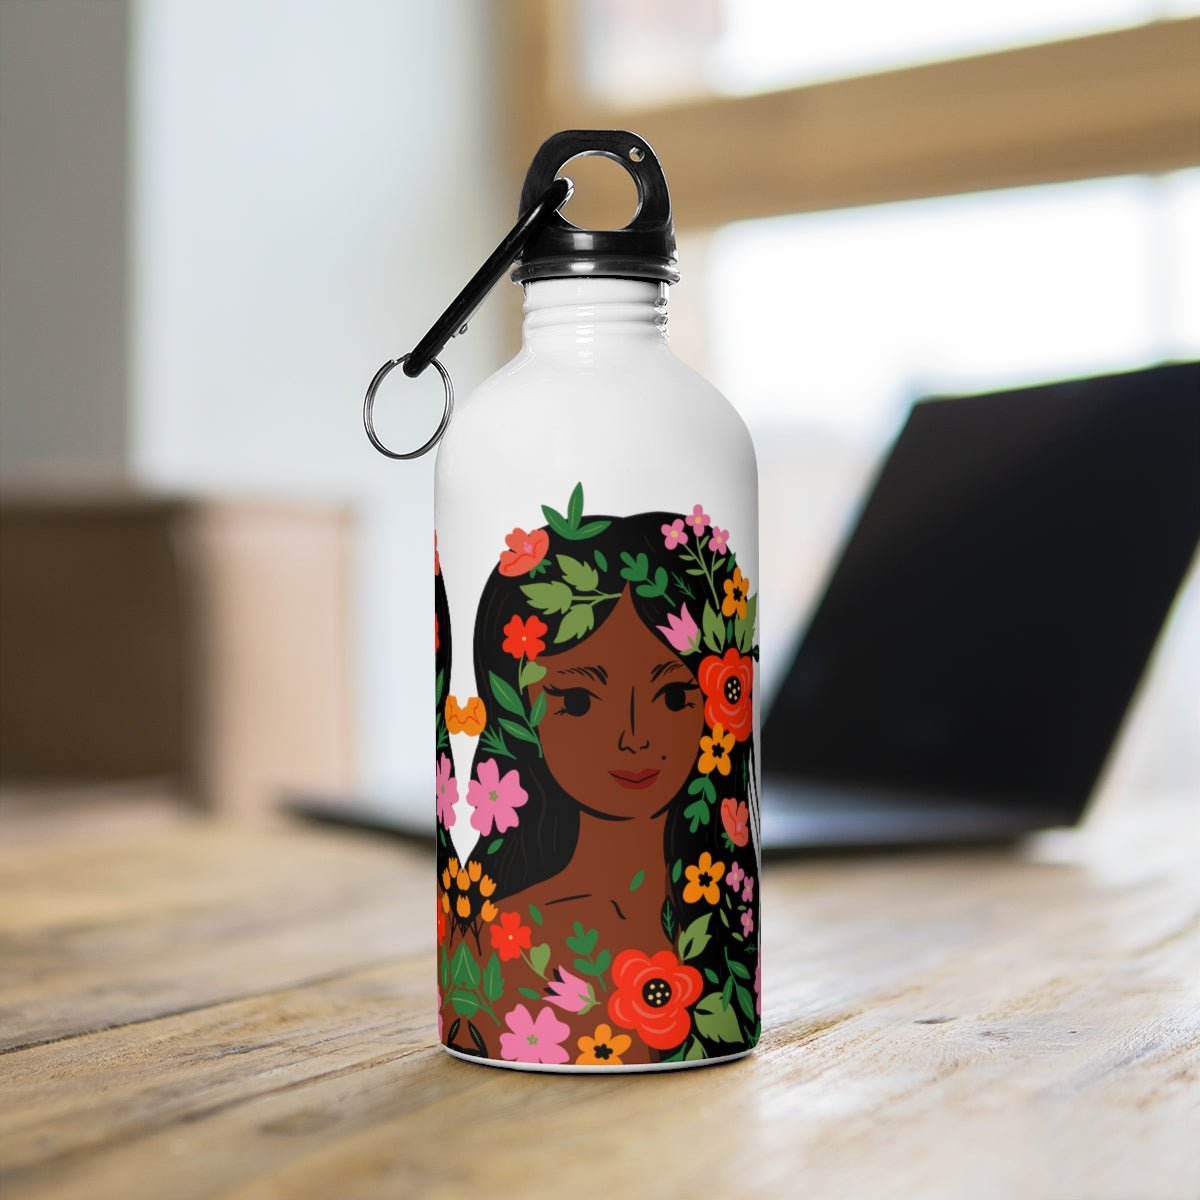 Flower Face Water Bottle - The Trini Gee